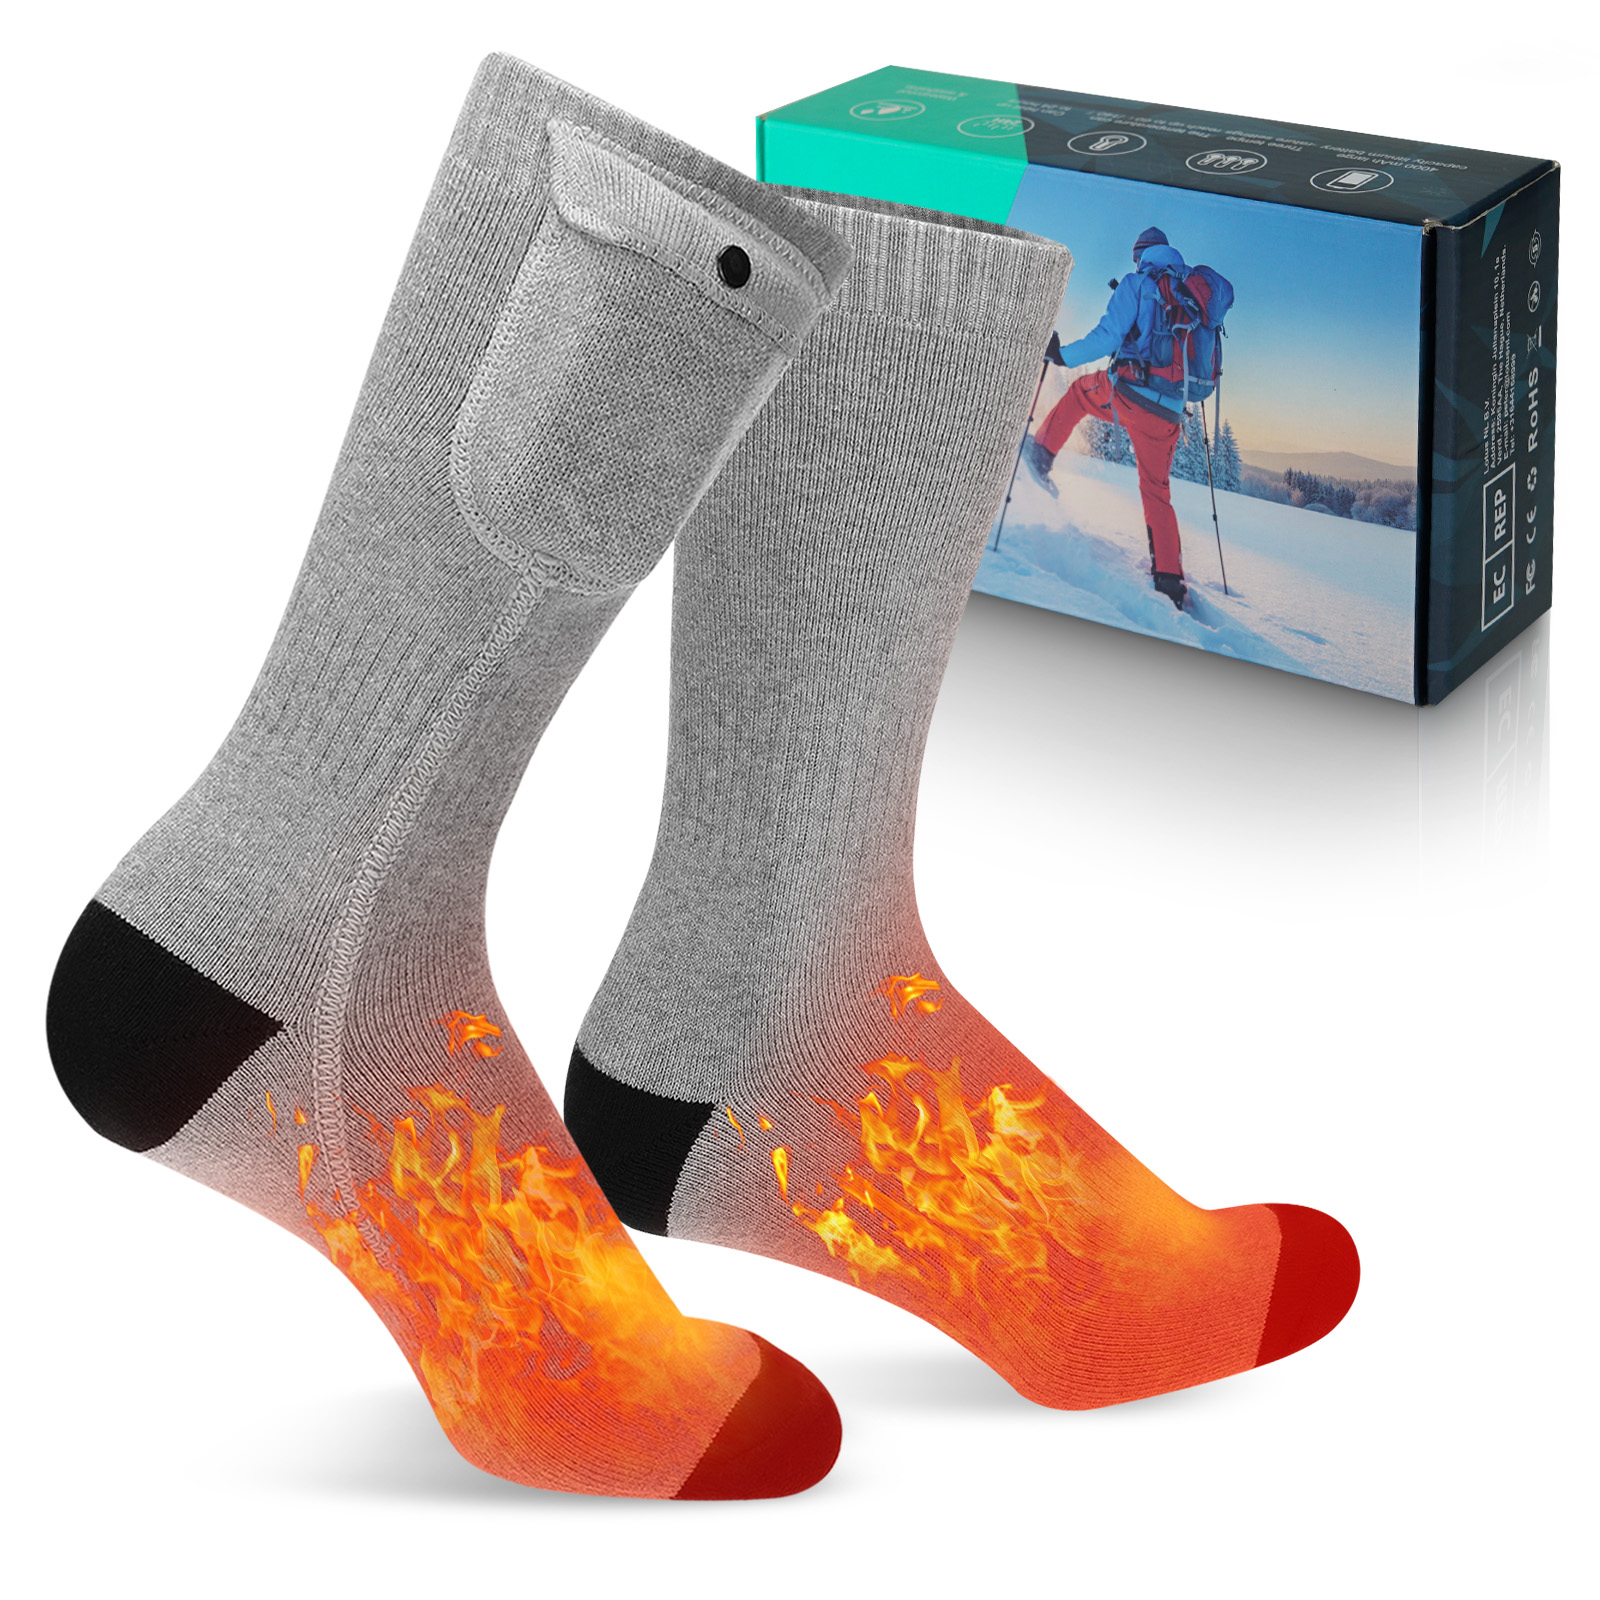 Heated Socks Electric Rechargeable Batteries Socks for Skiing & 3 Level Settings 